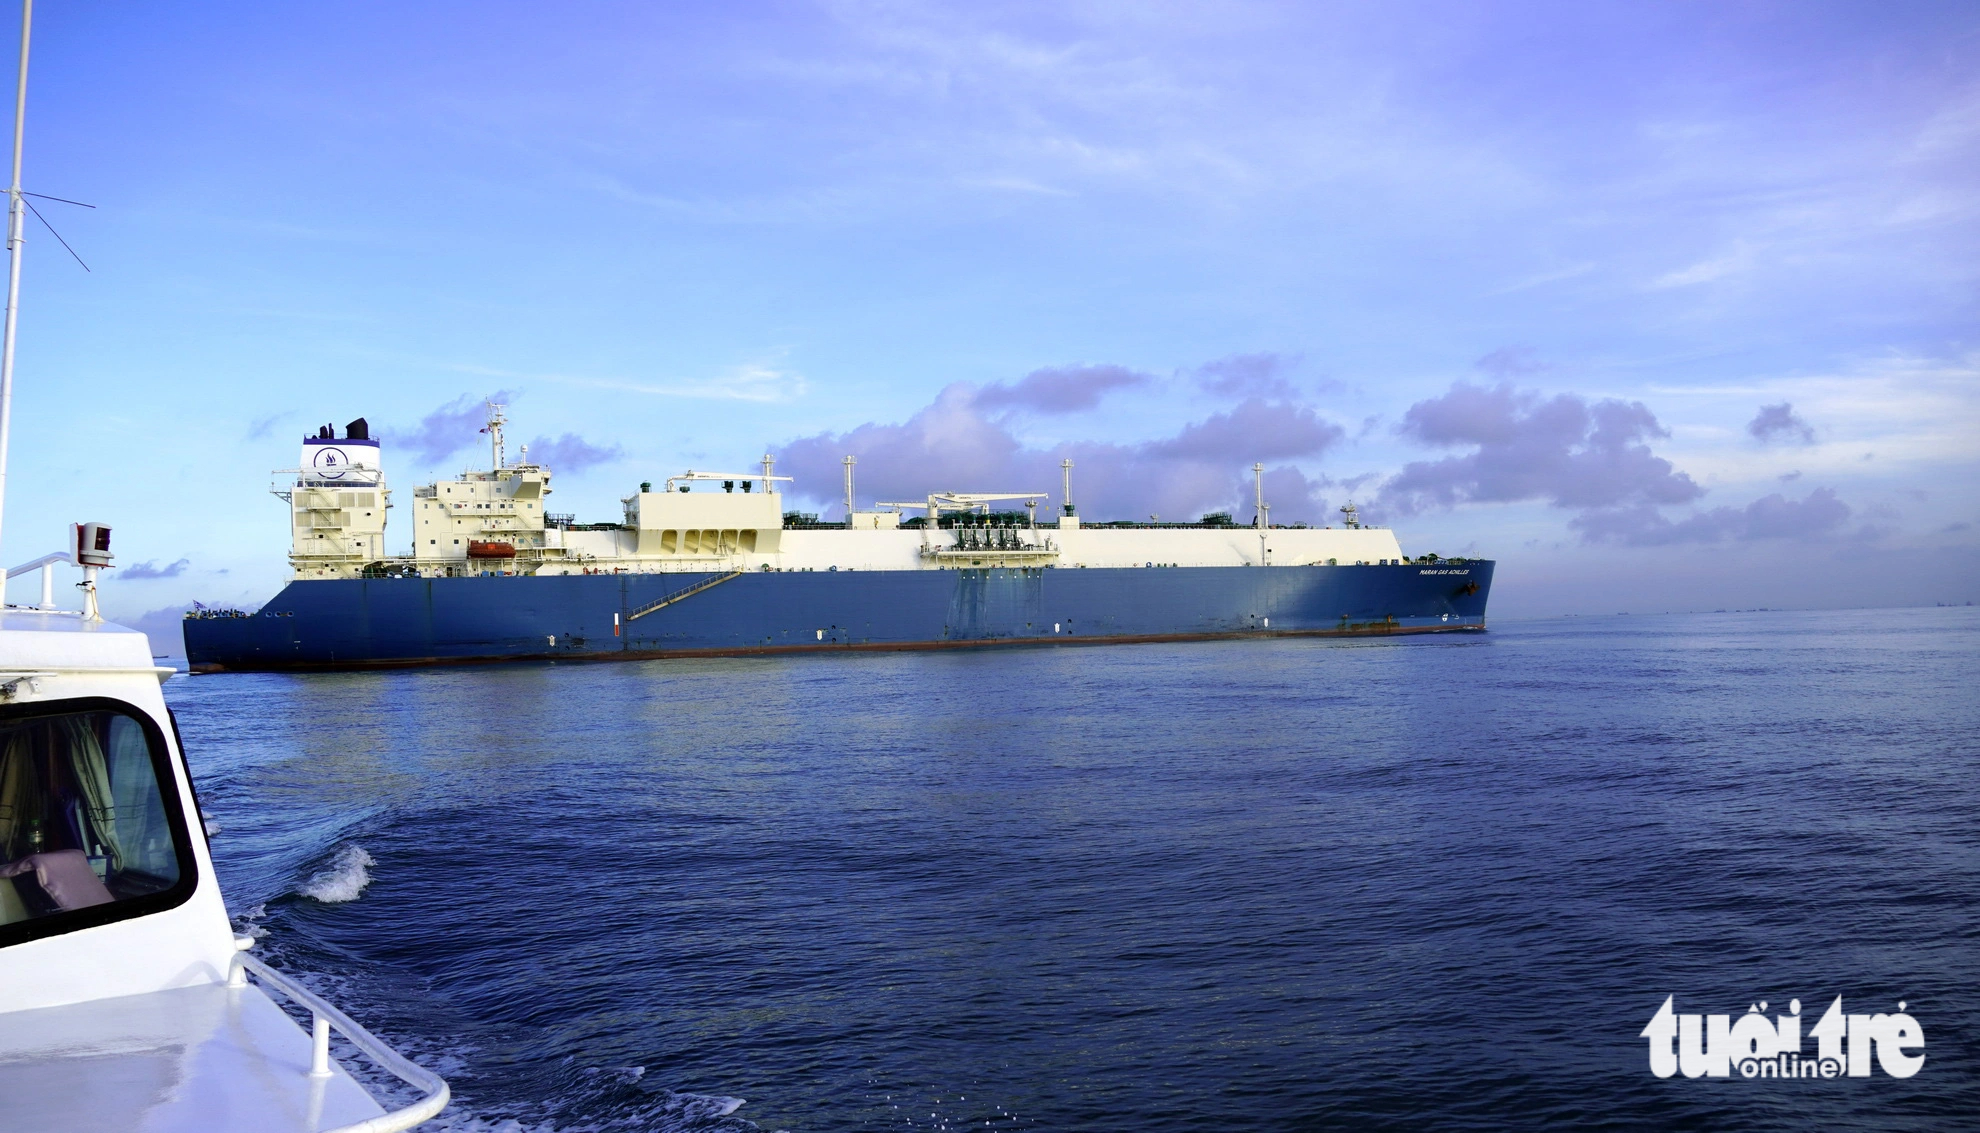 Vessel carrying 70,000 metric tons of liquefied natural gas arrives at southern Vietnam port